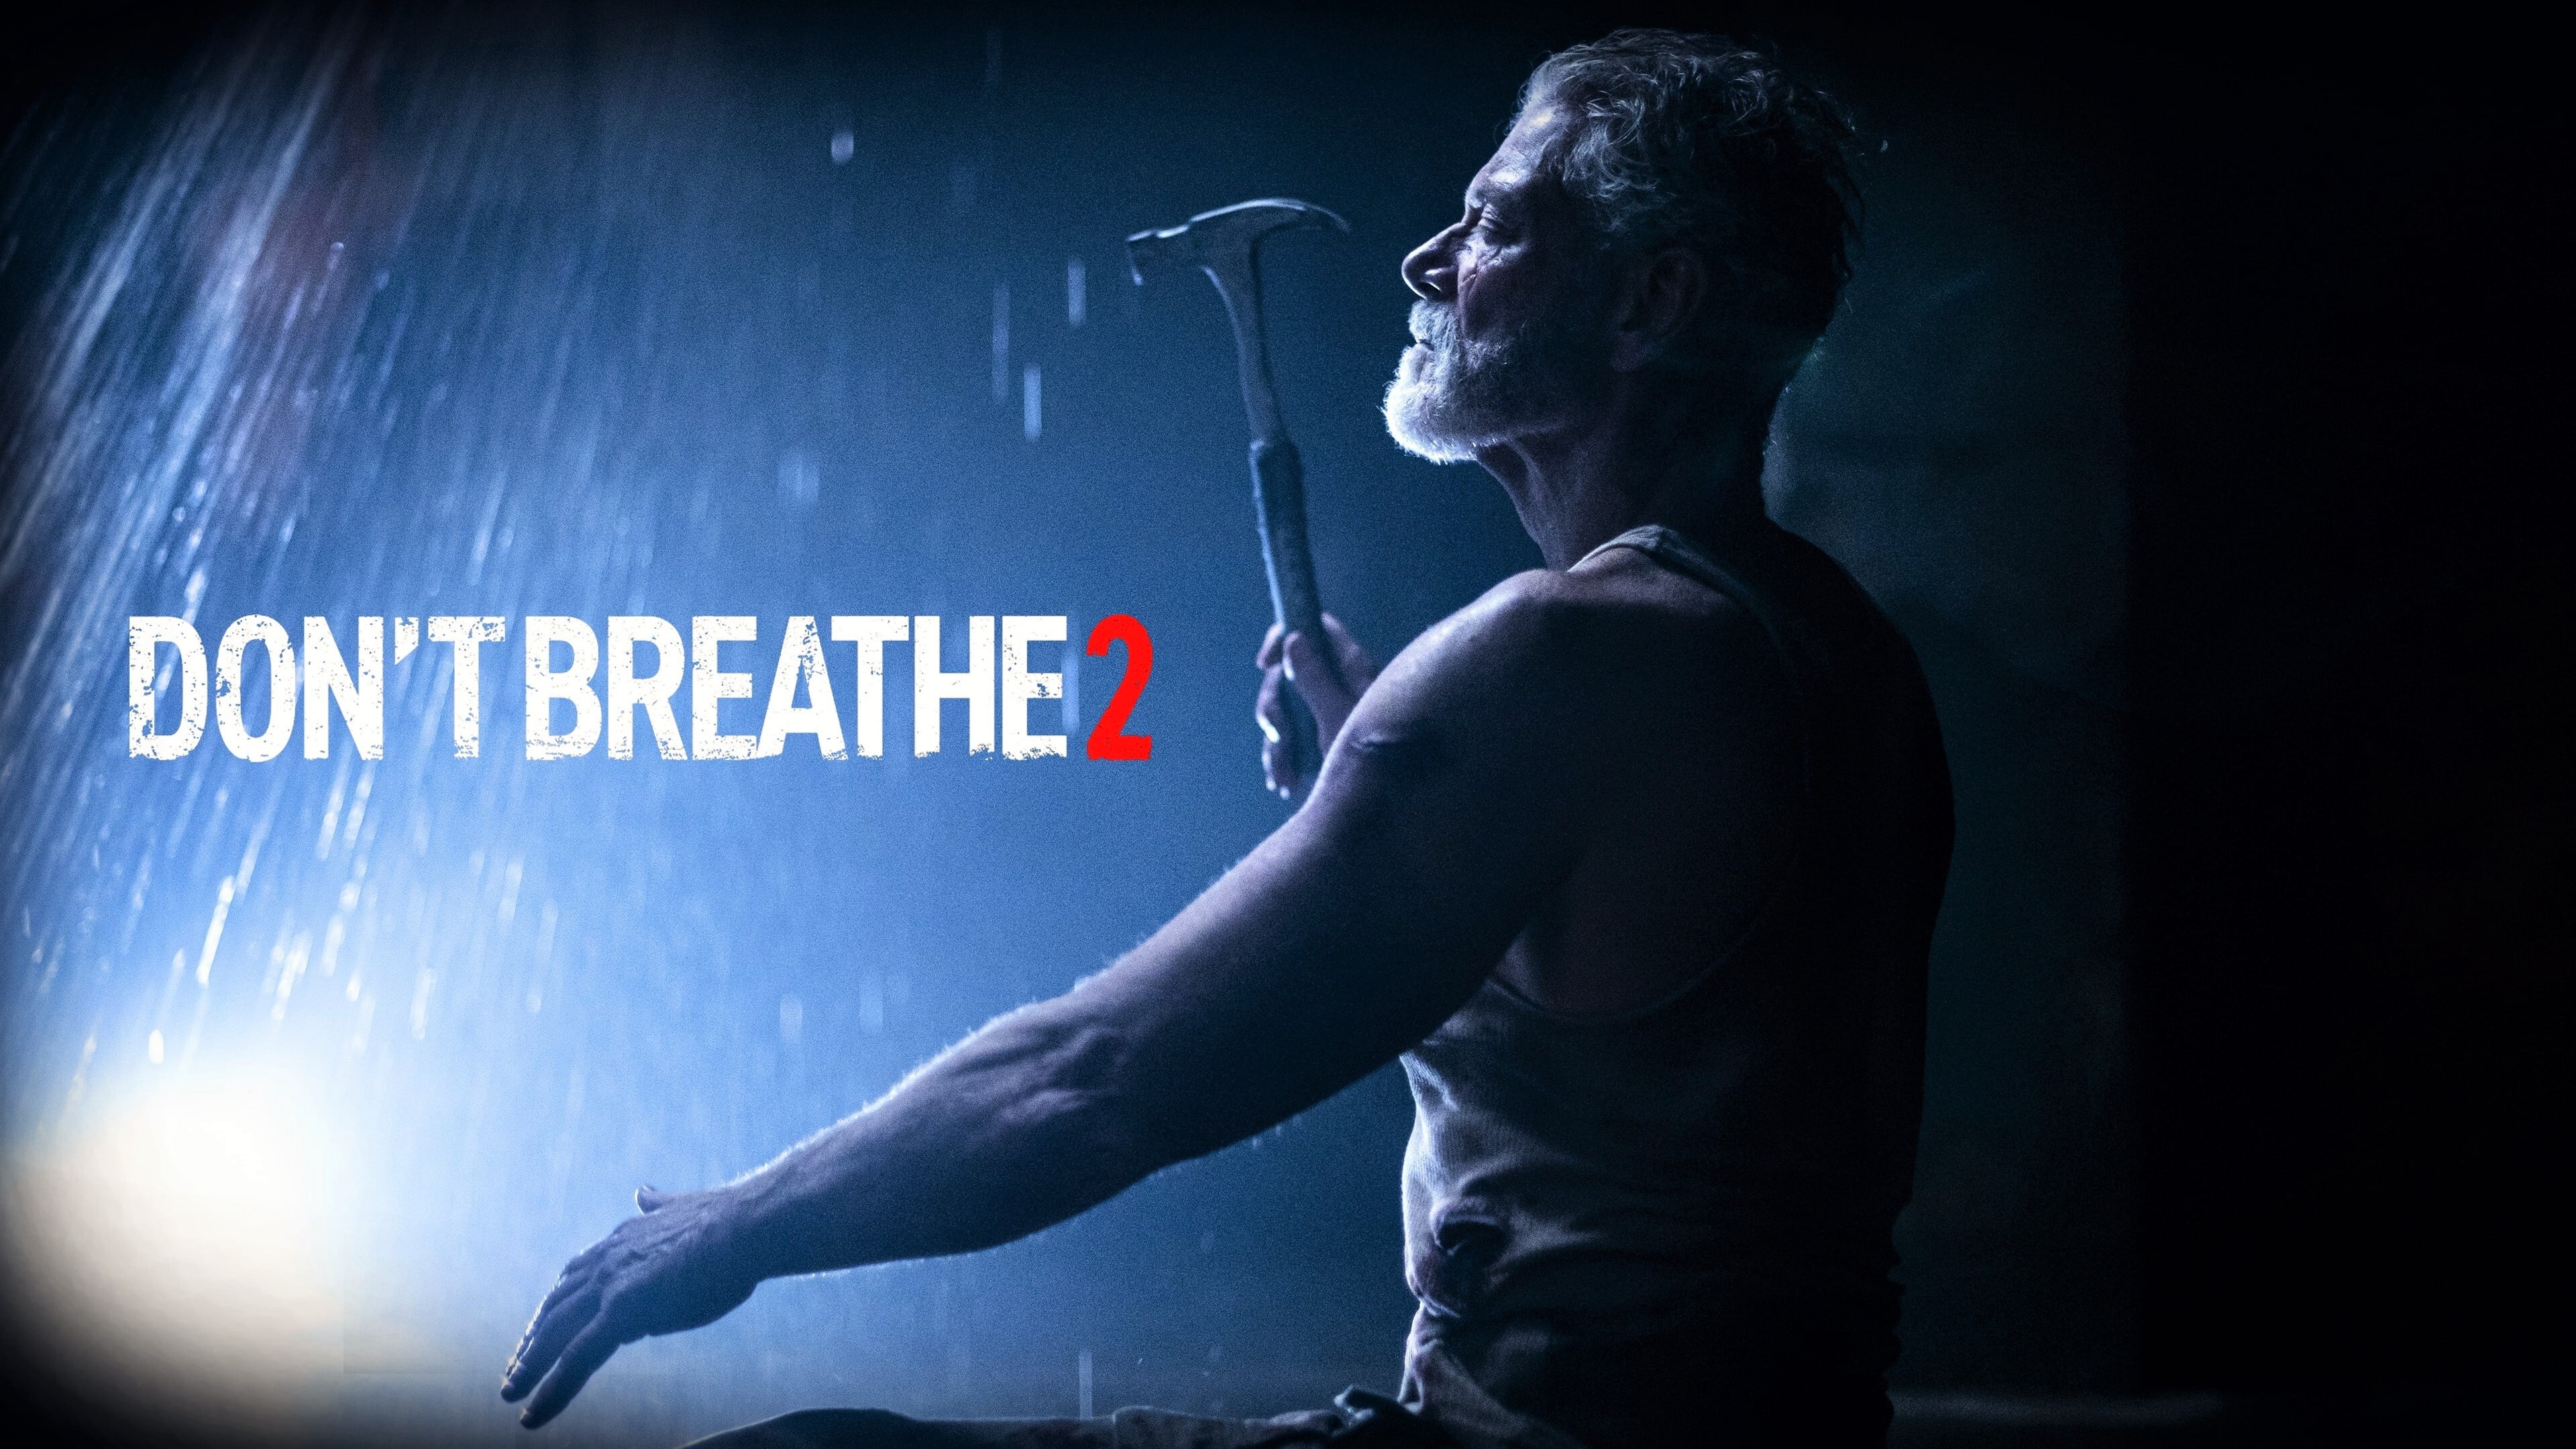 Movie Don't Breathe 2 HD Wallpaper | Background Image